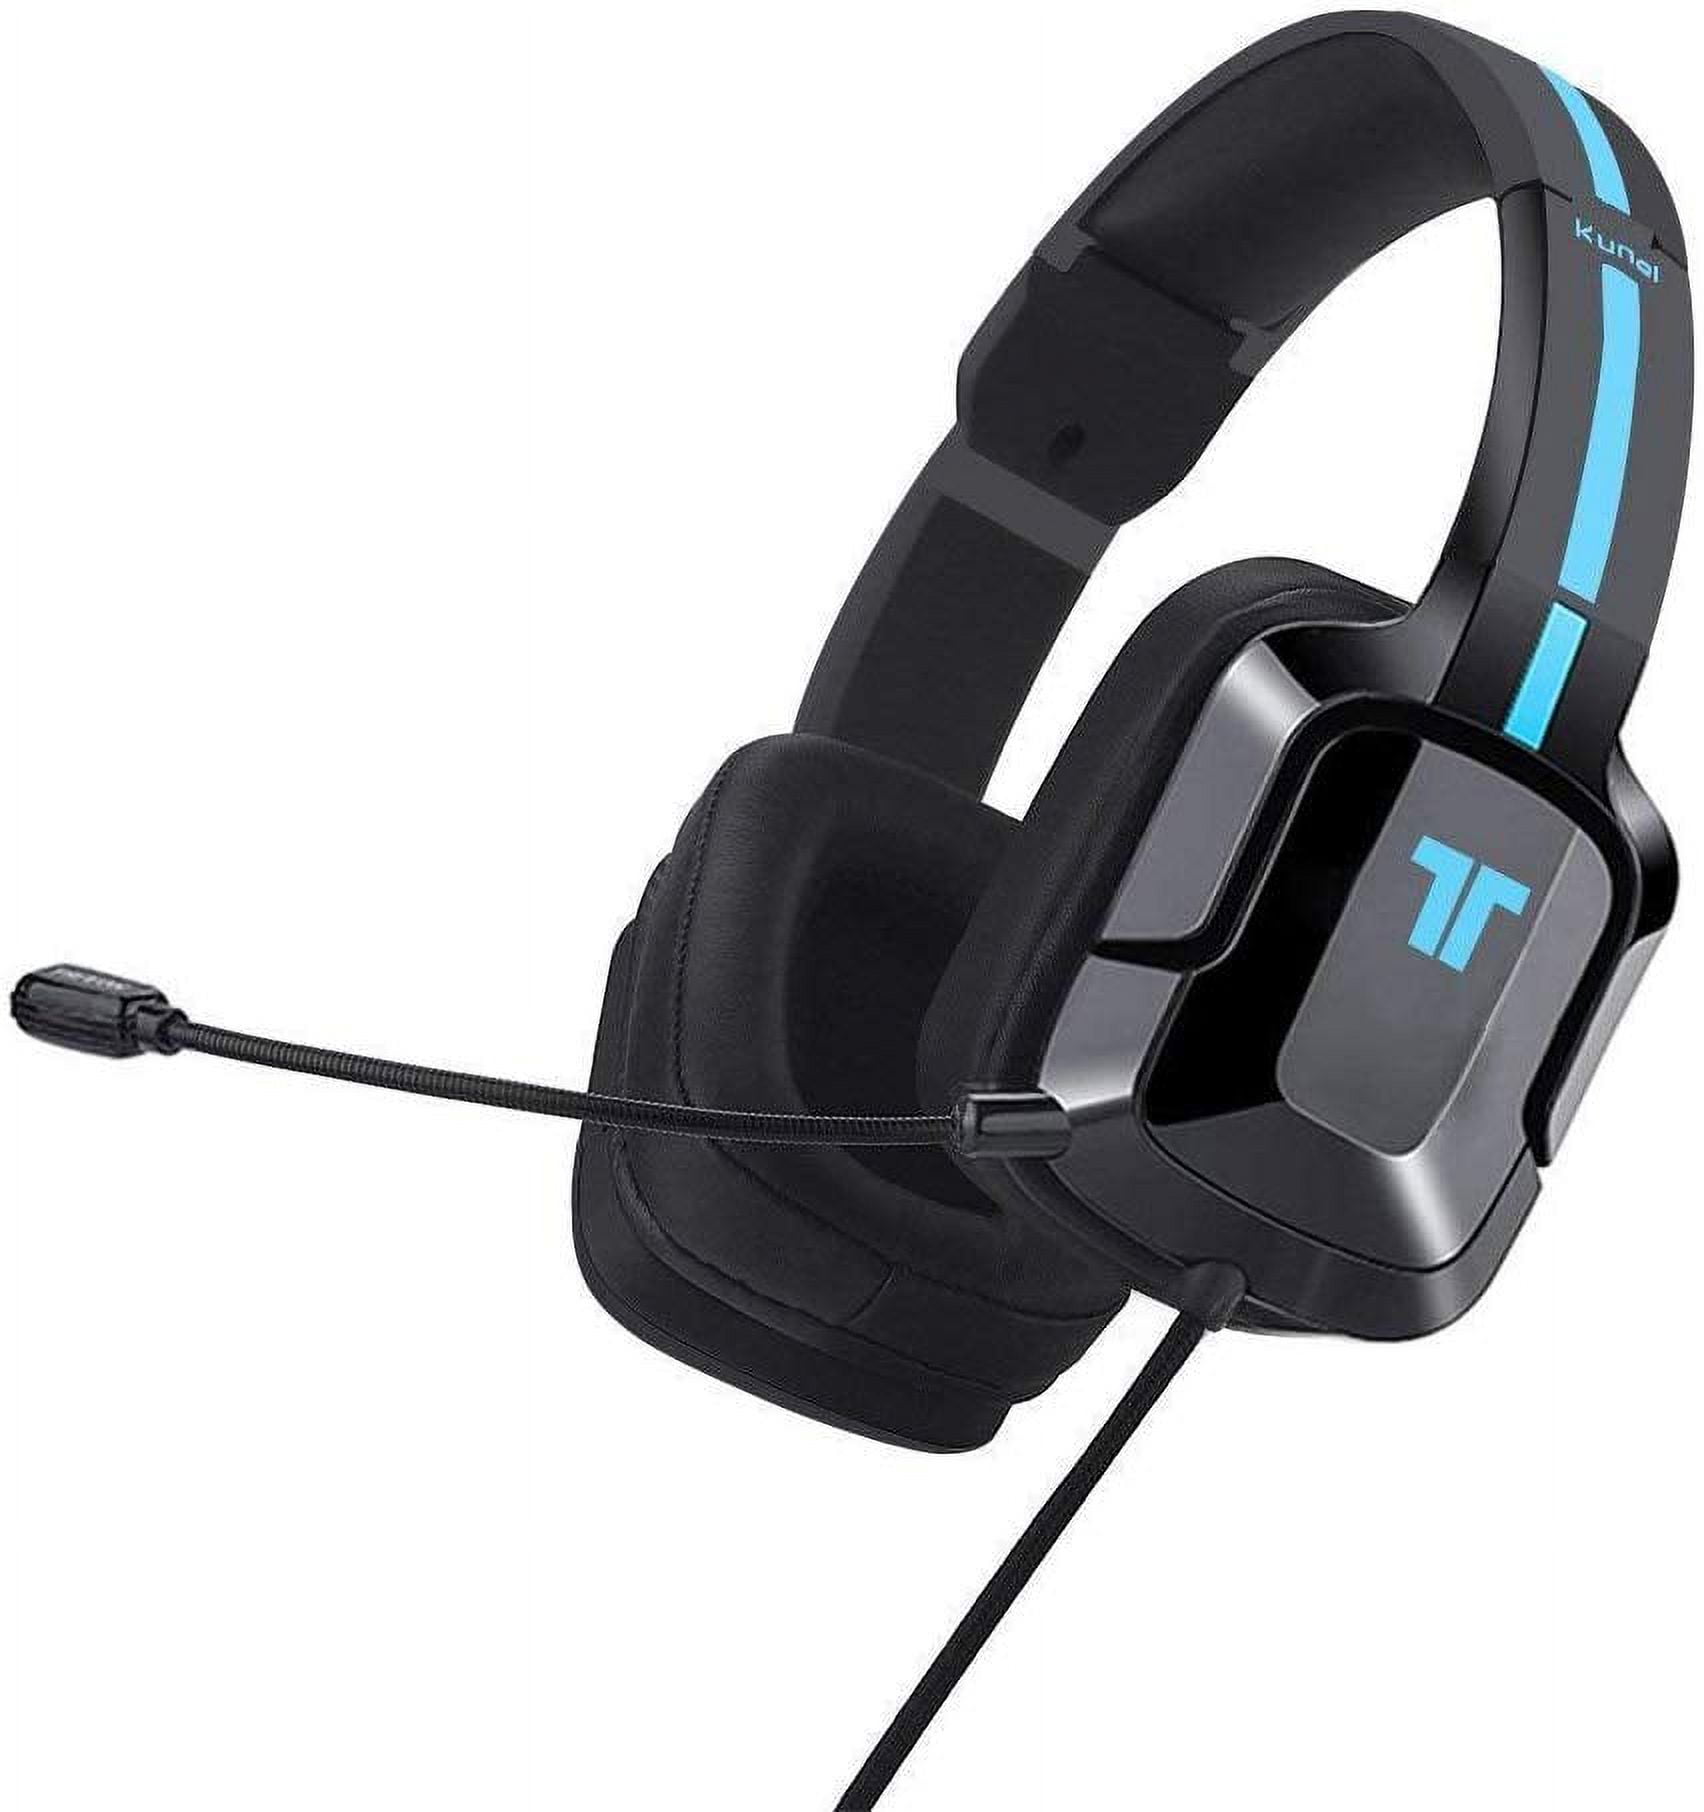 TRITTON Kunai Pro 7.1 Virtual Surround Sound PC Gaming Headset with USB  Cable, Gaming Headphone with Soft Memory Earmuffs Compatible with PC, PS4